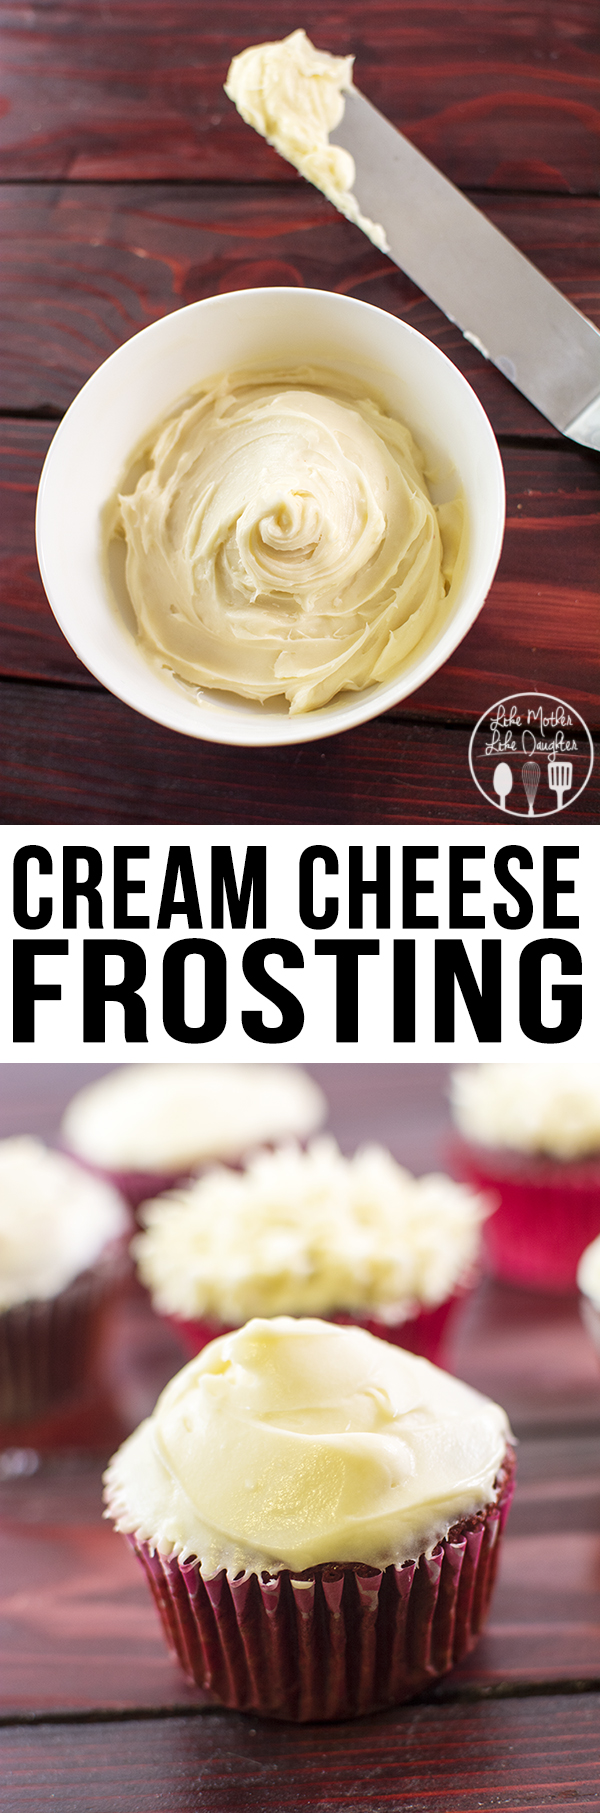 Cream Cheese Frosting that is so smooth, tangy and sweet, perfect for any cakes, cookies, cinnamon rolls, or to eat by the spoonful!